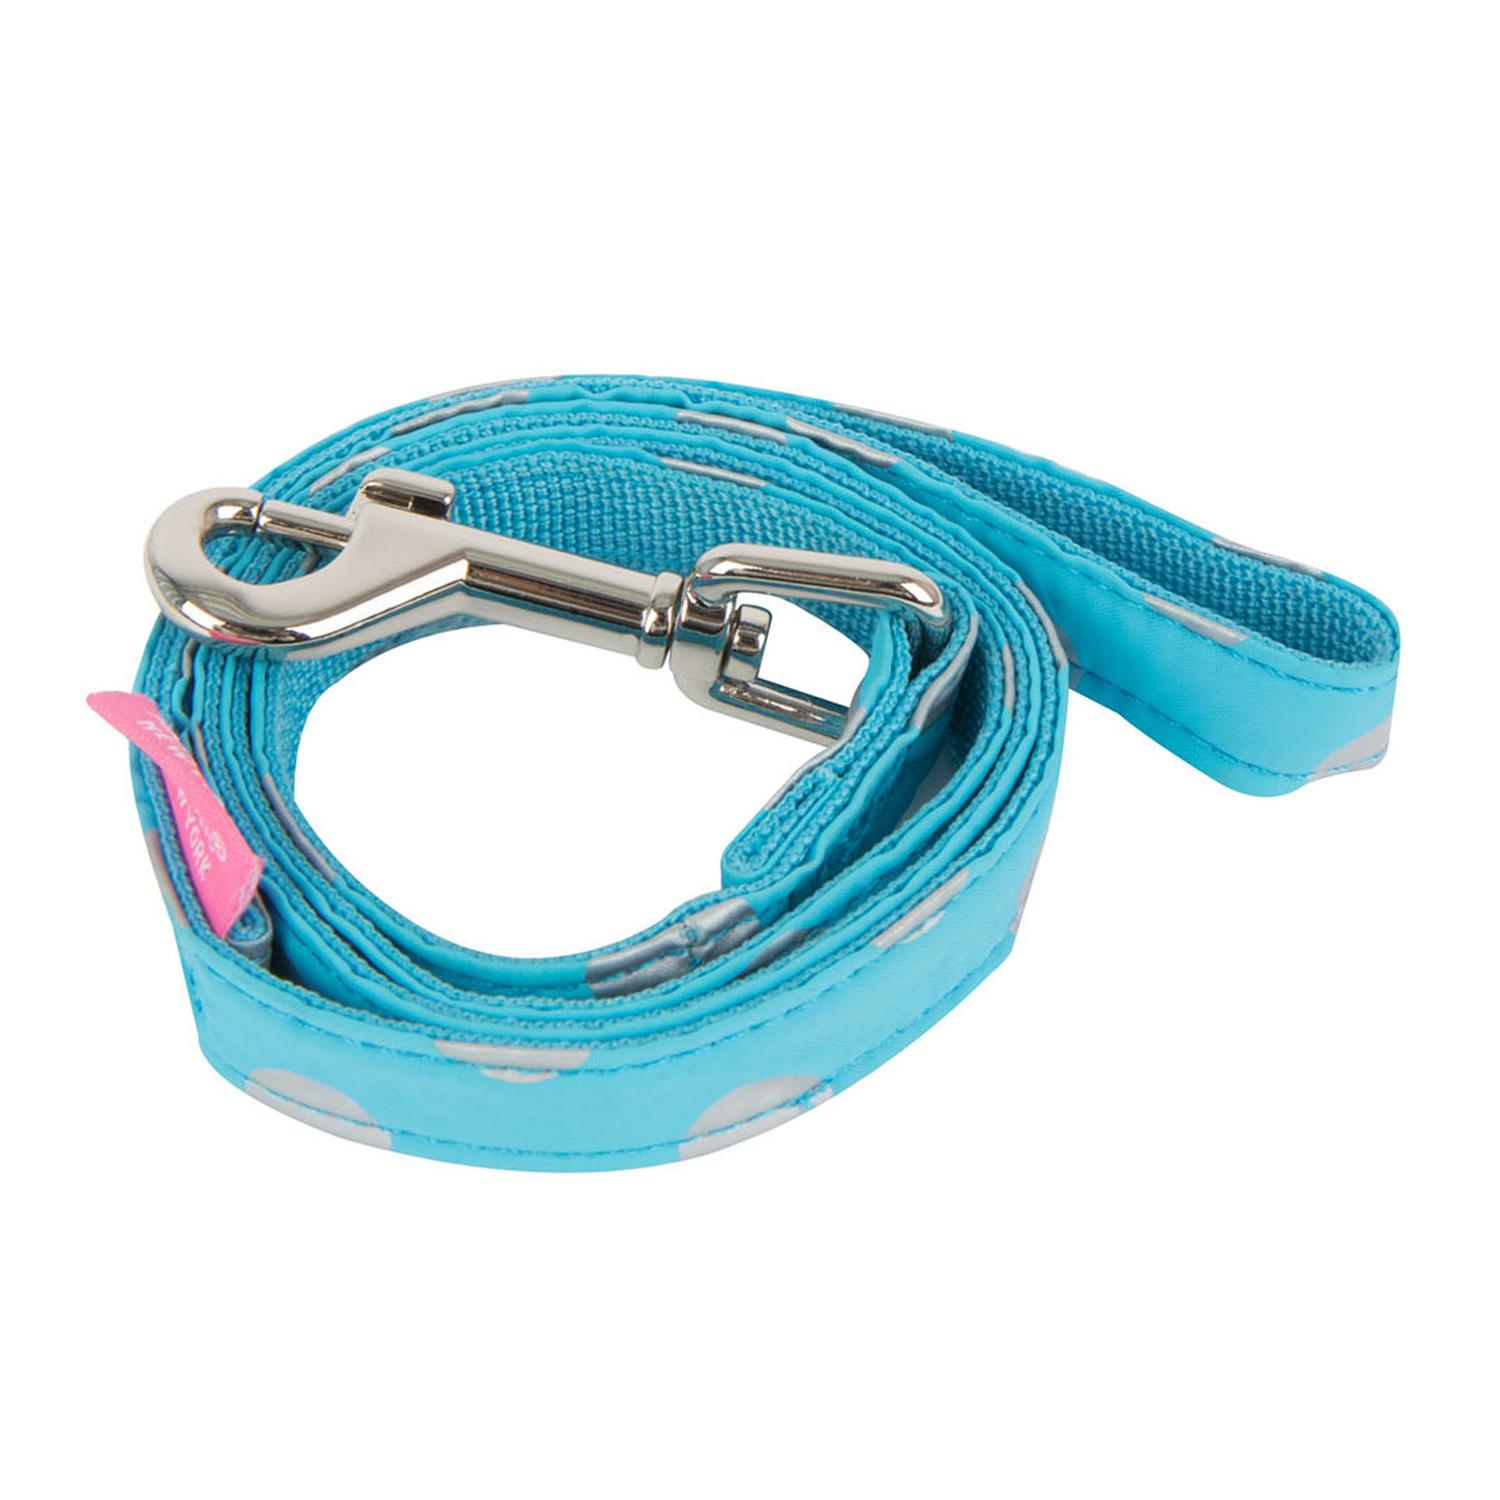 Chic Dog Leash by Pinkaholic - Blue